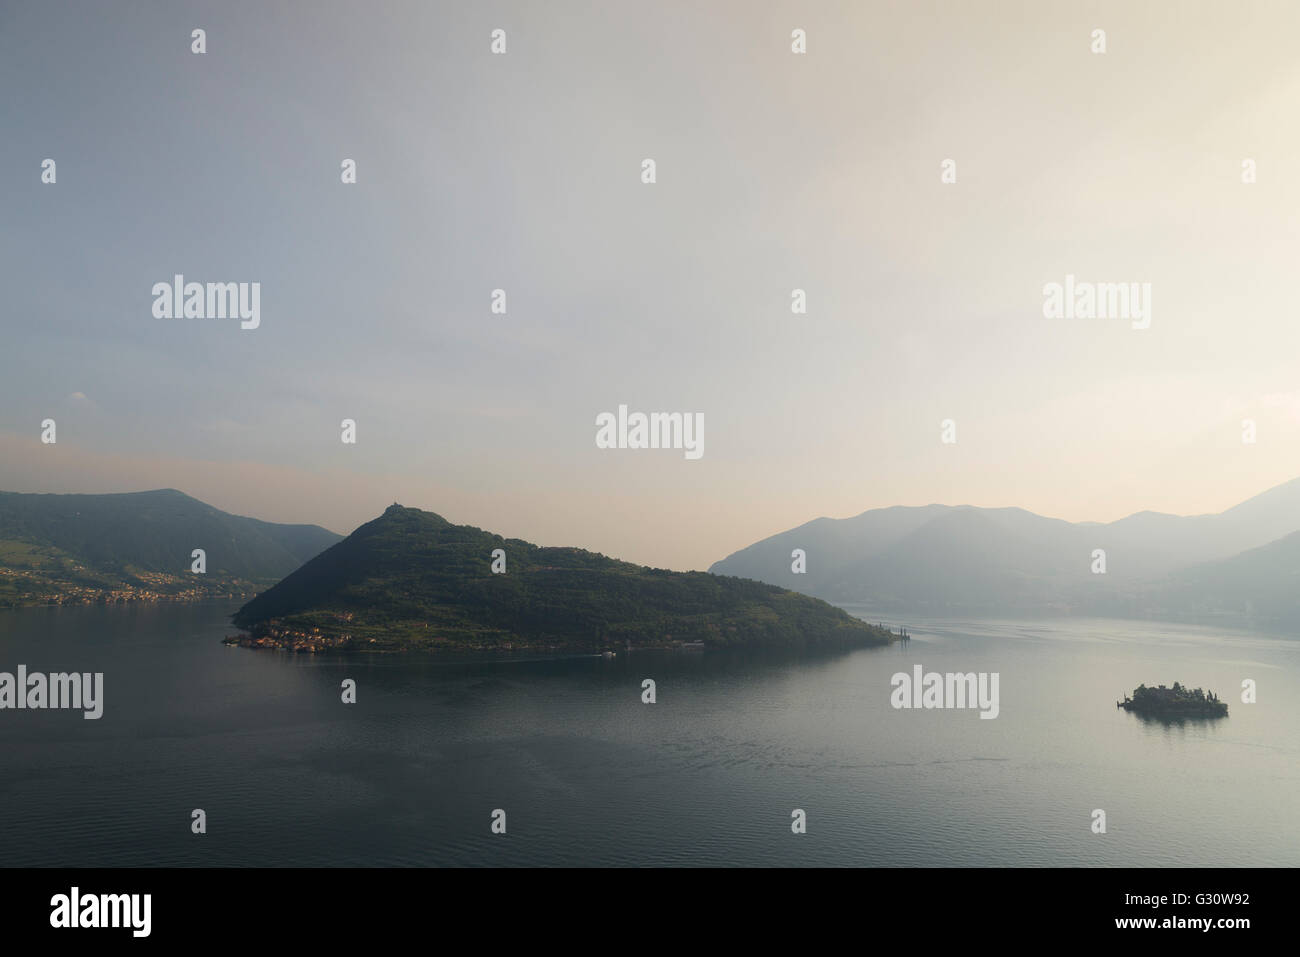 The islands of Monte Isola and Isola di Loreto at Lake Iseo with surrounding mountains and a glowing sky at sunset Stock Photo